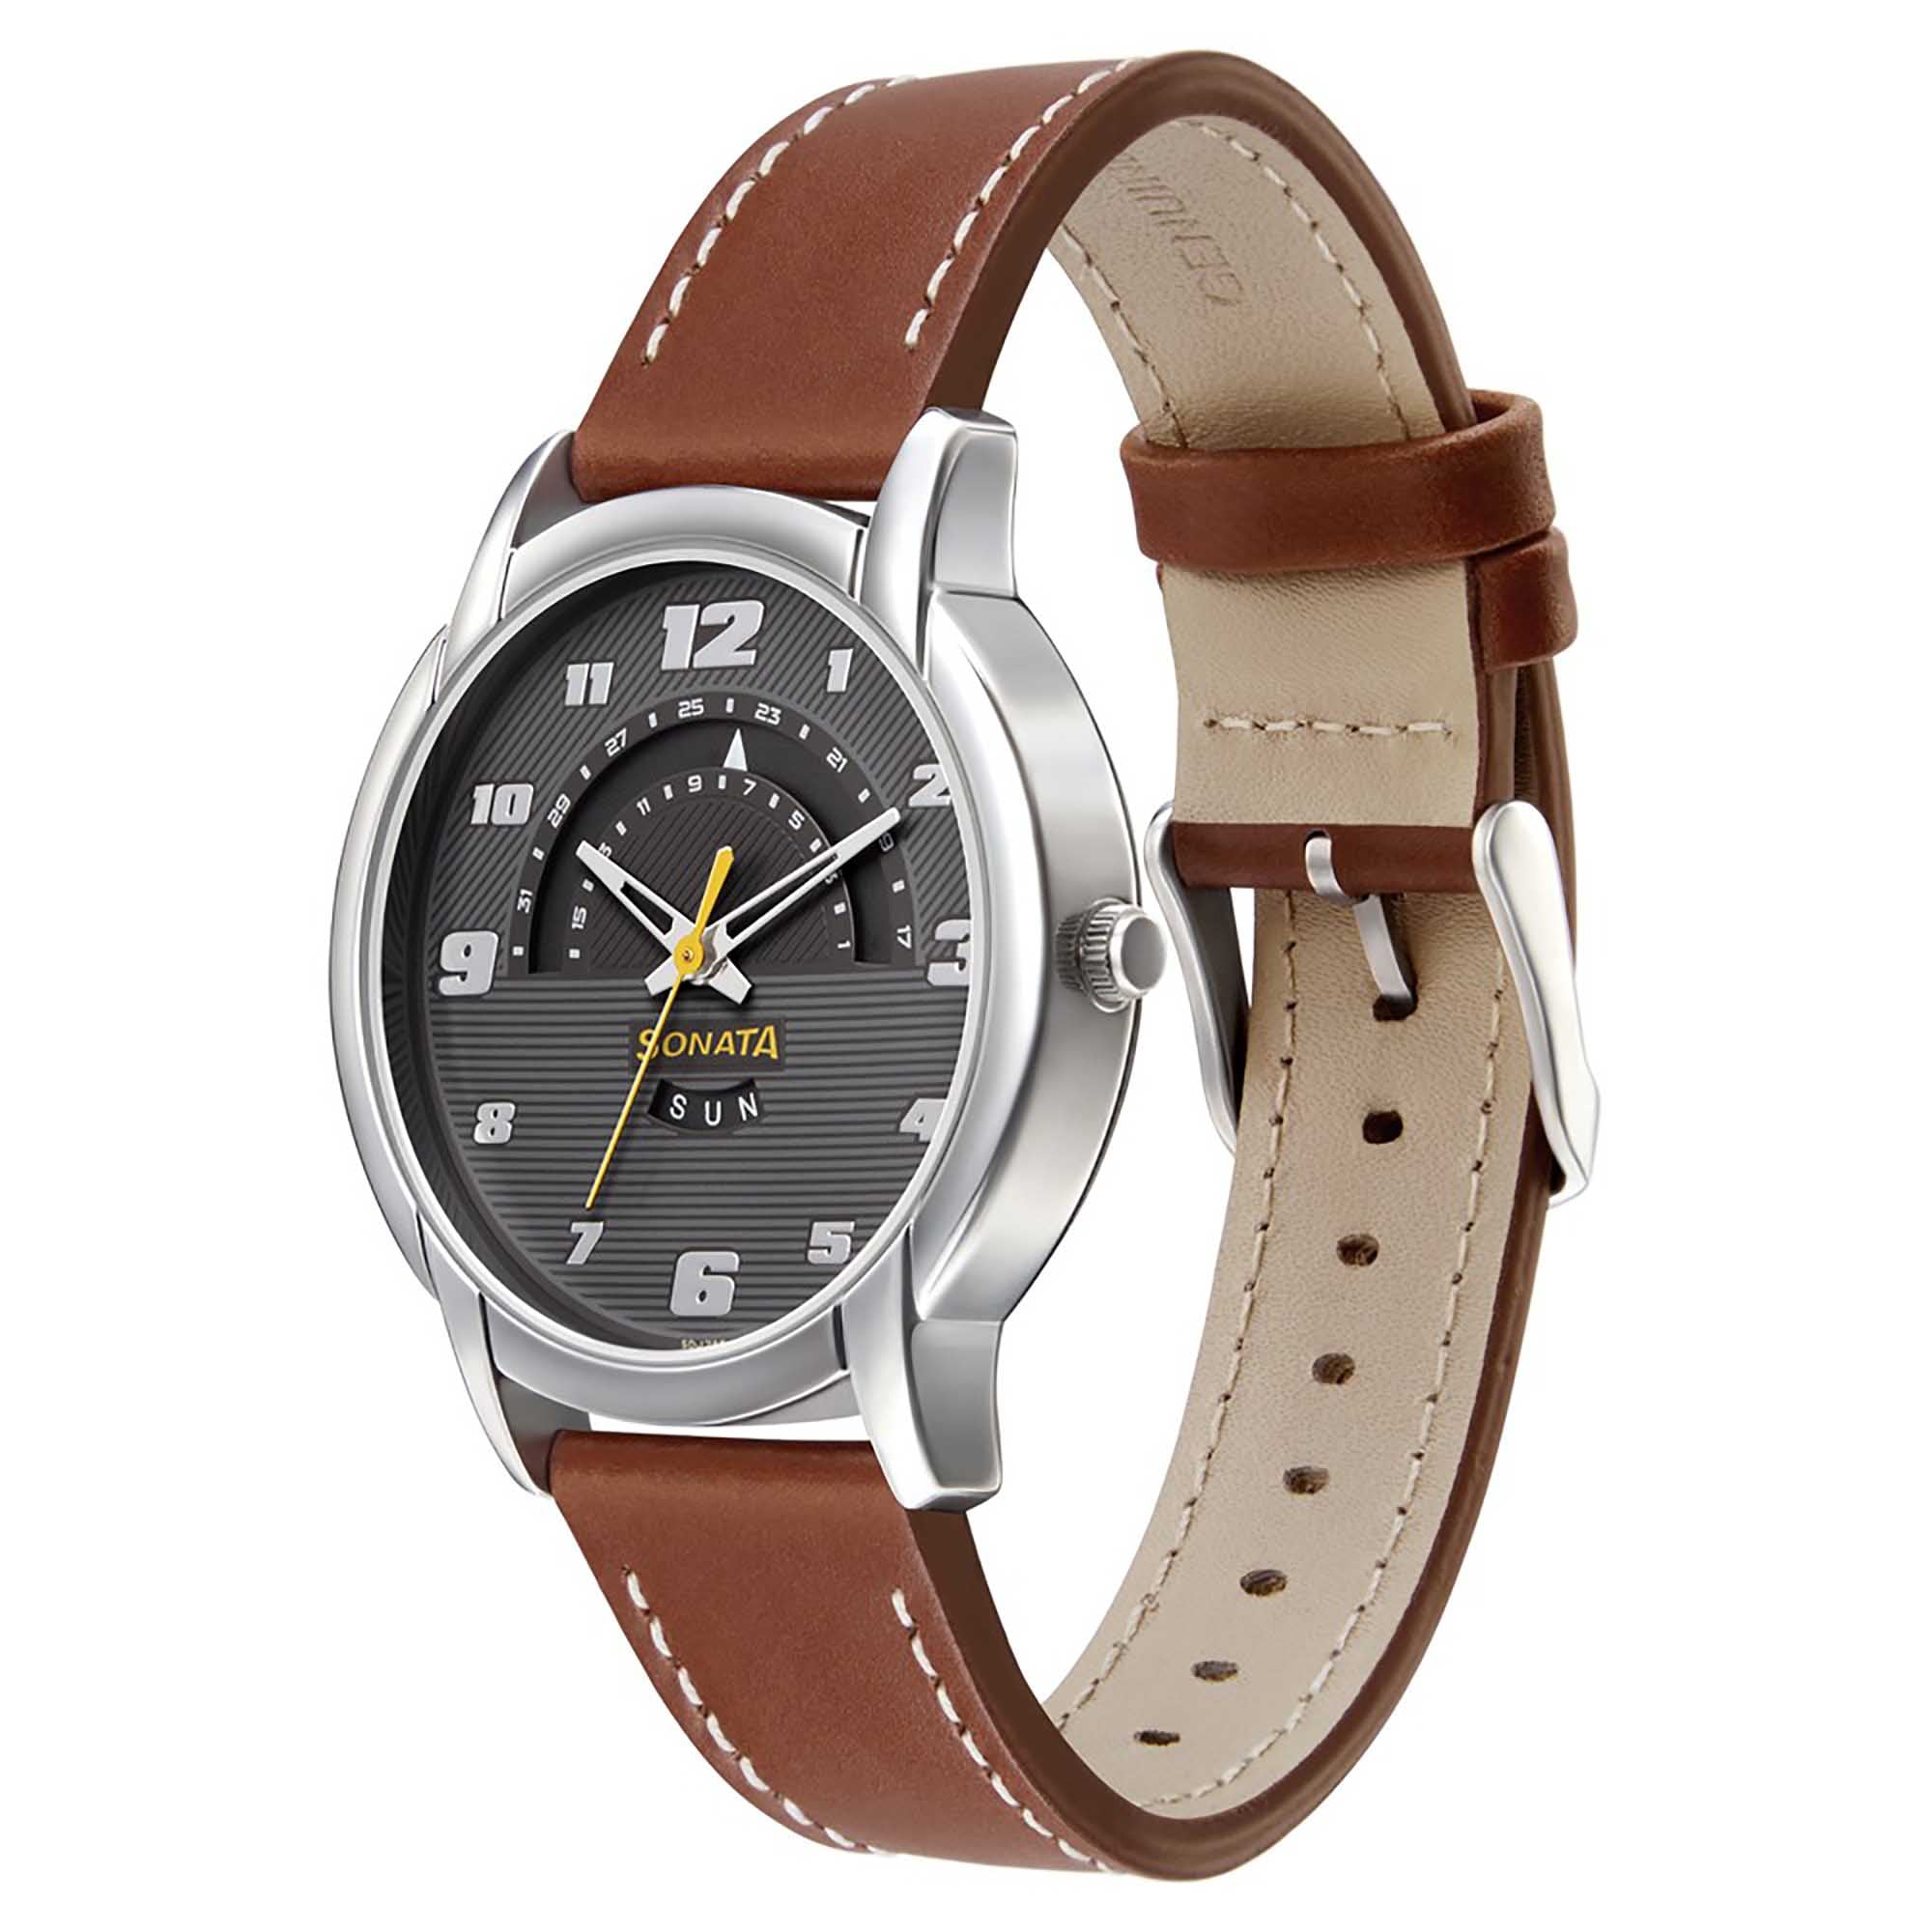 Sonata Quartz Analog with Day and Date Anthracite Dial Leather Strap Watch for Men